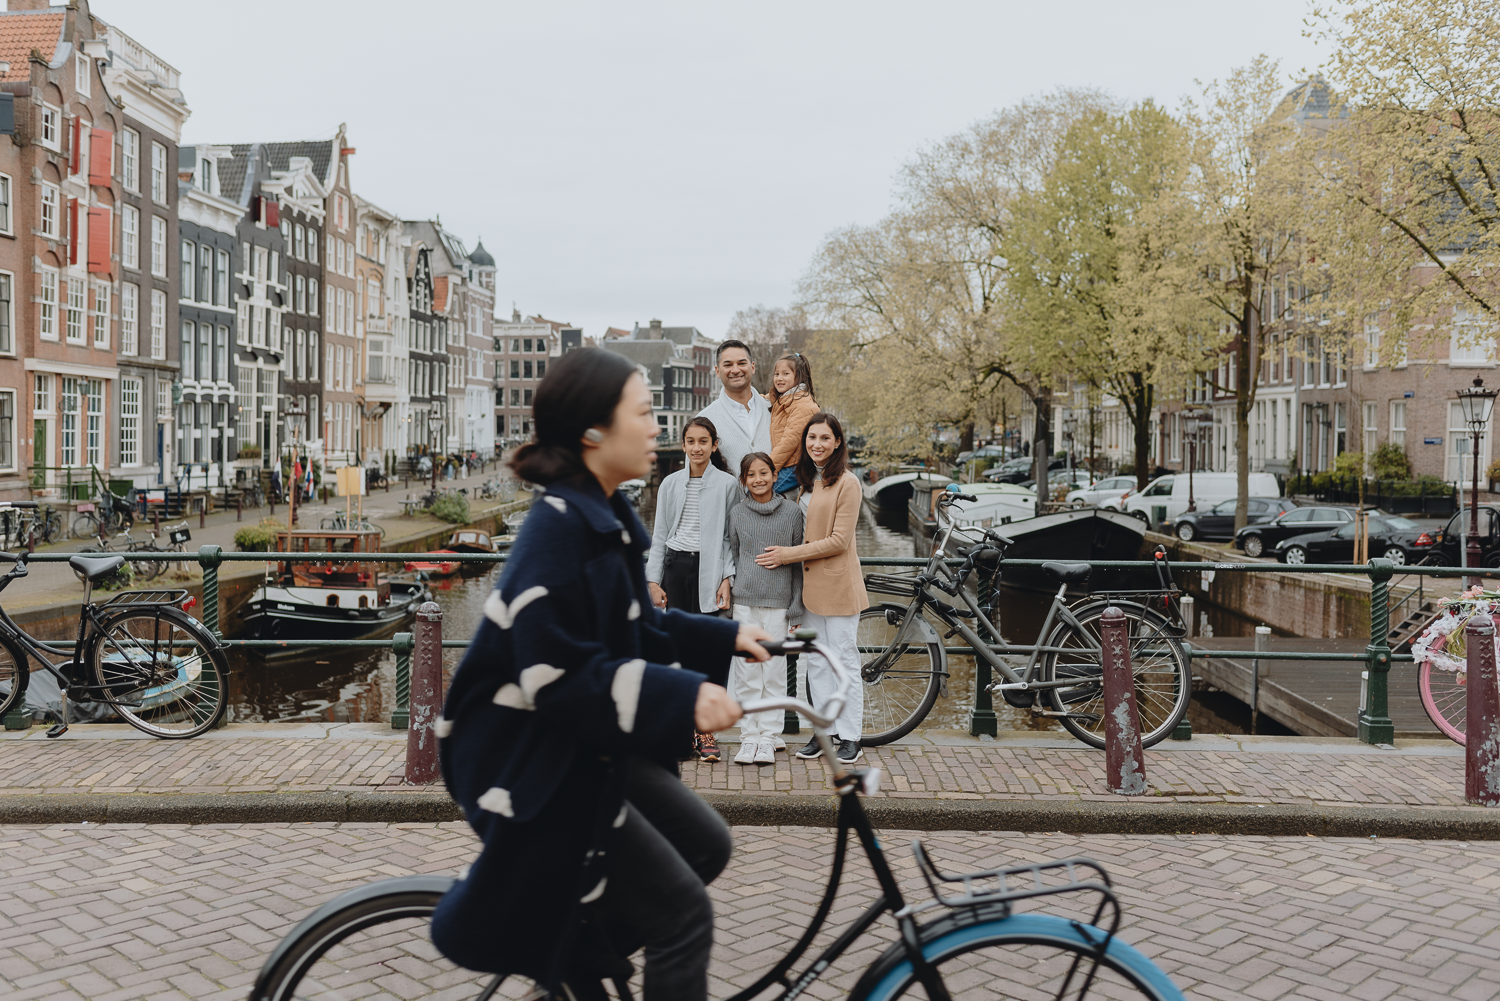 Family Photoshoot in Amsterdam by Vicky McLachlan Photography | Fun photo of an American Family standing together in Amsterdam with a woman on a bike photoboming the photo.-1.png